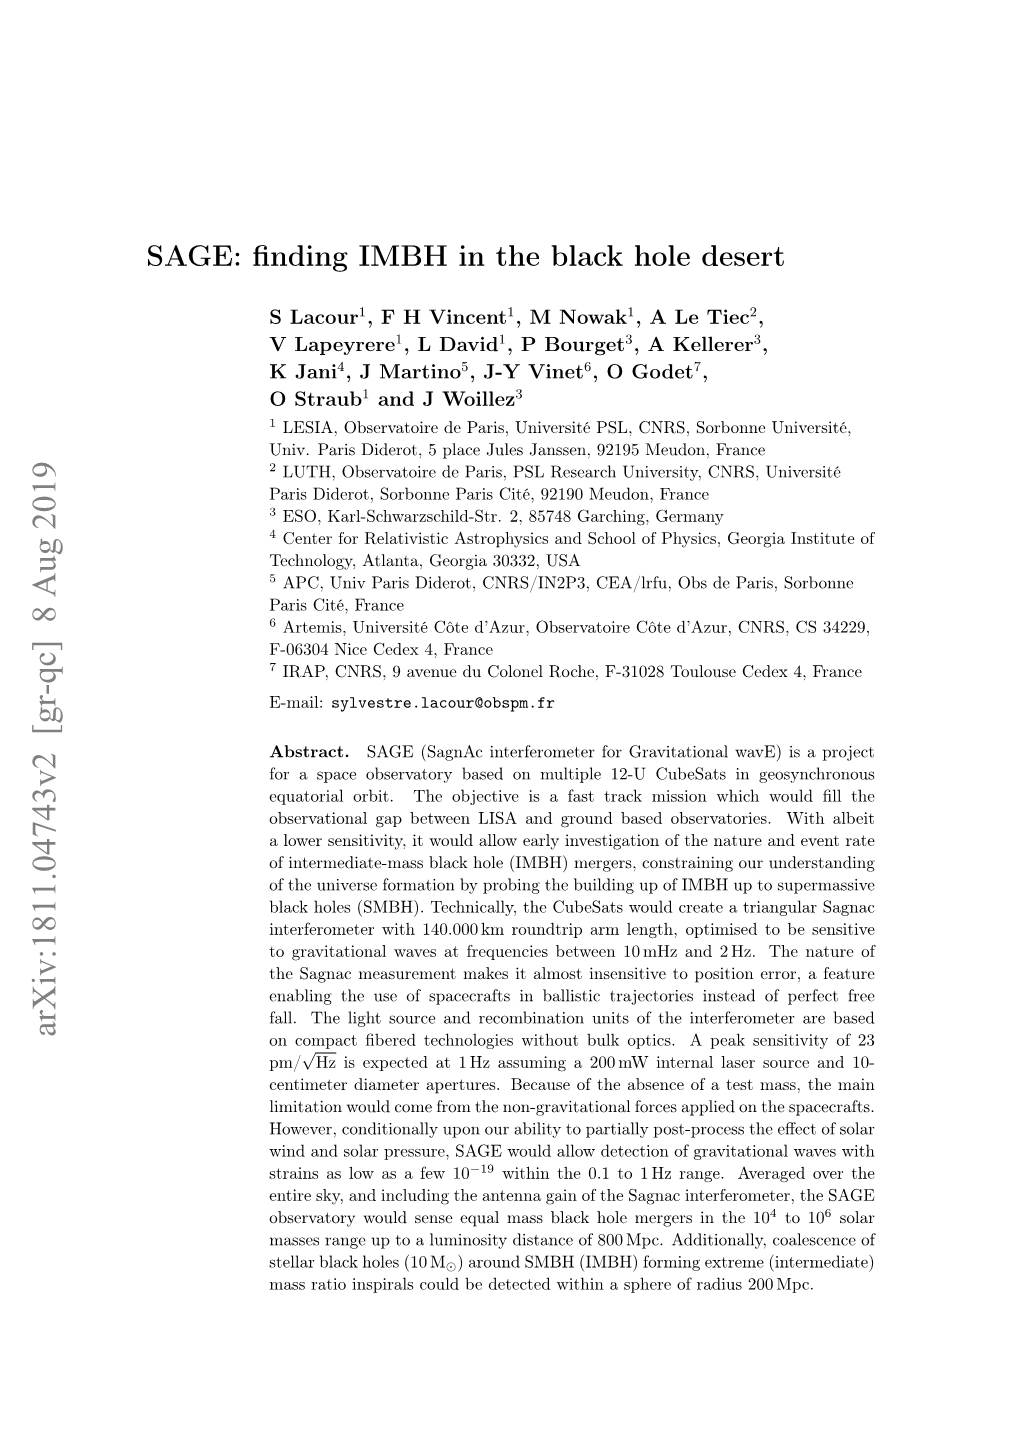 SAGE: Finding IMBH in the Black Hole Desert